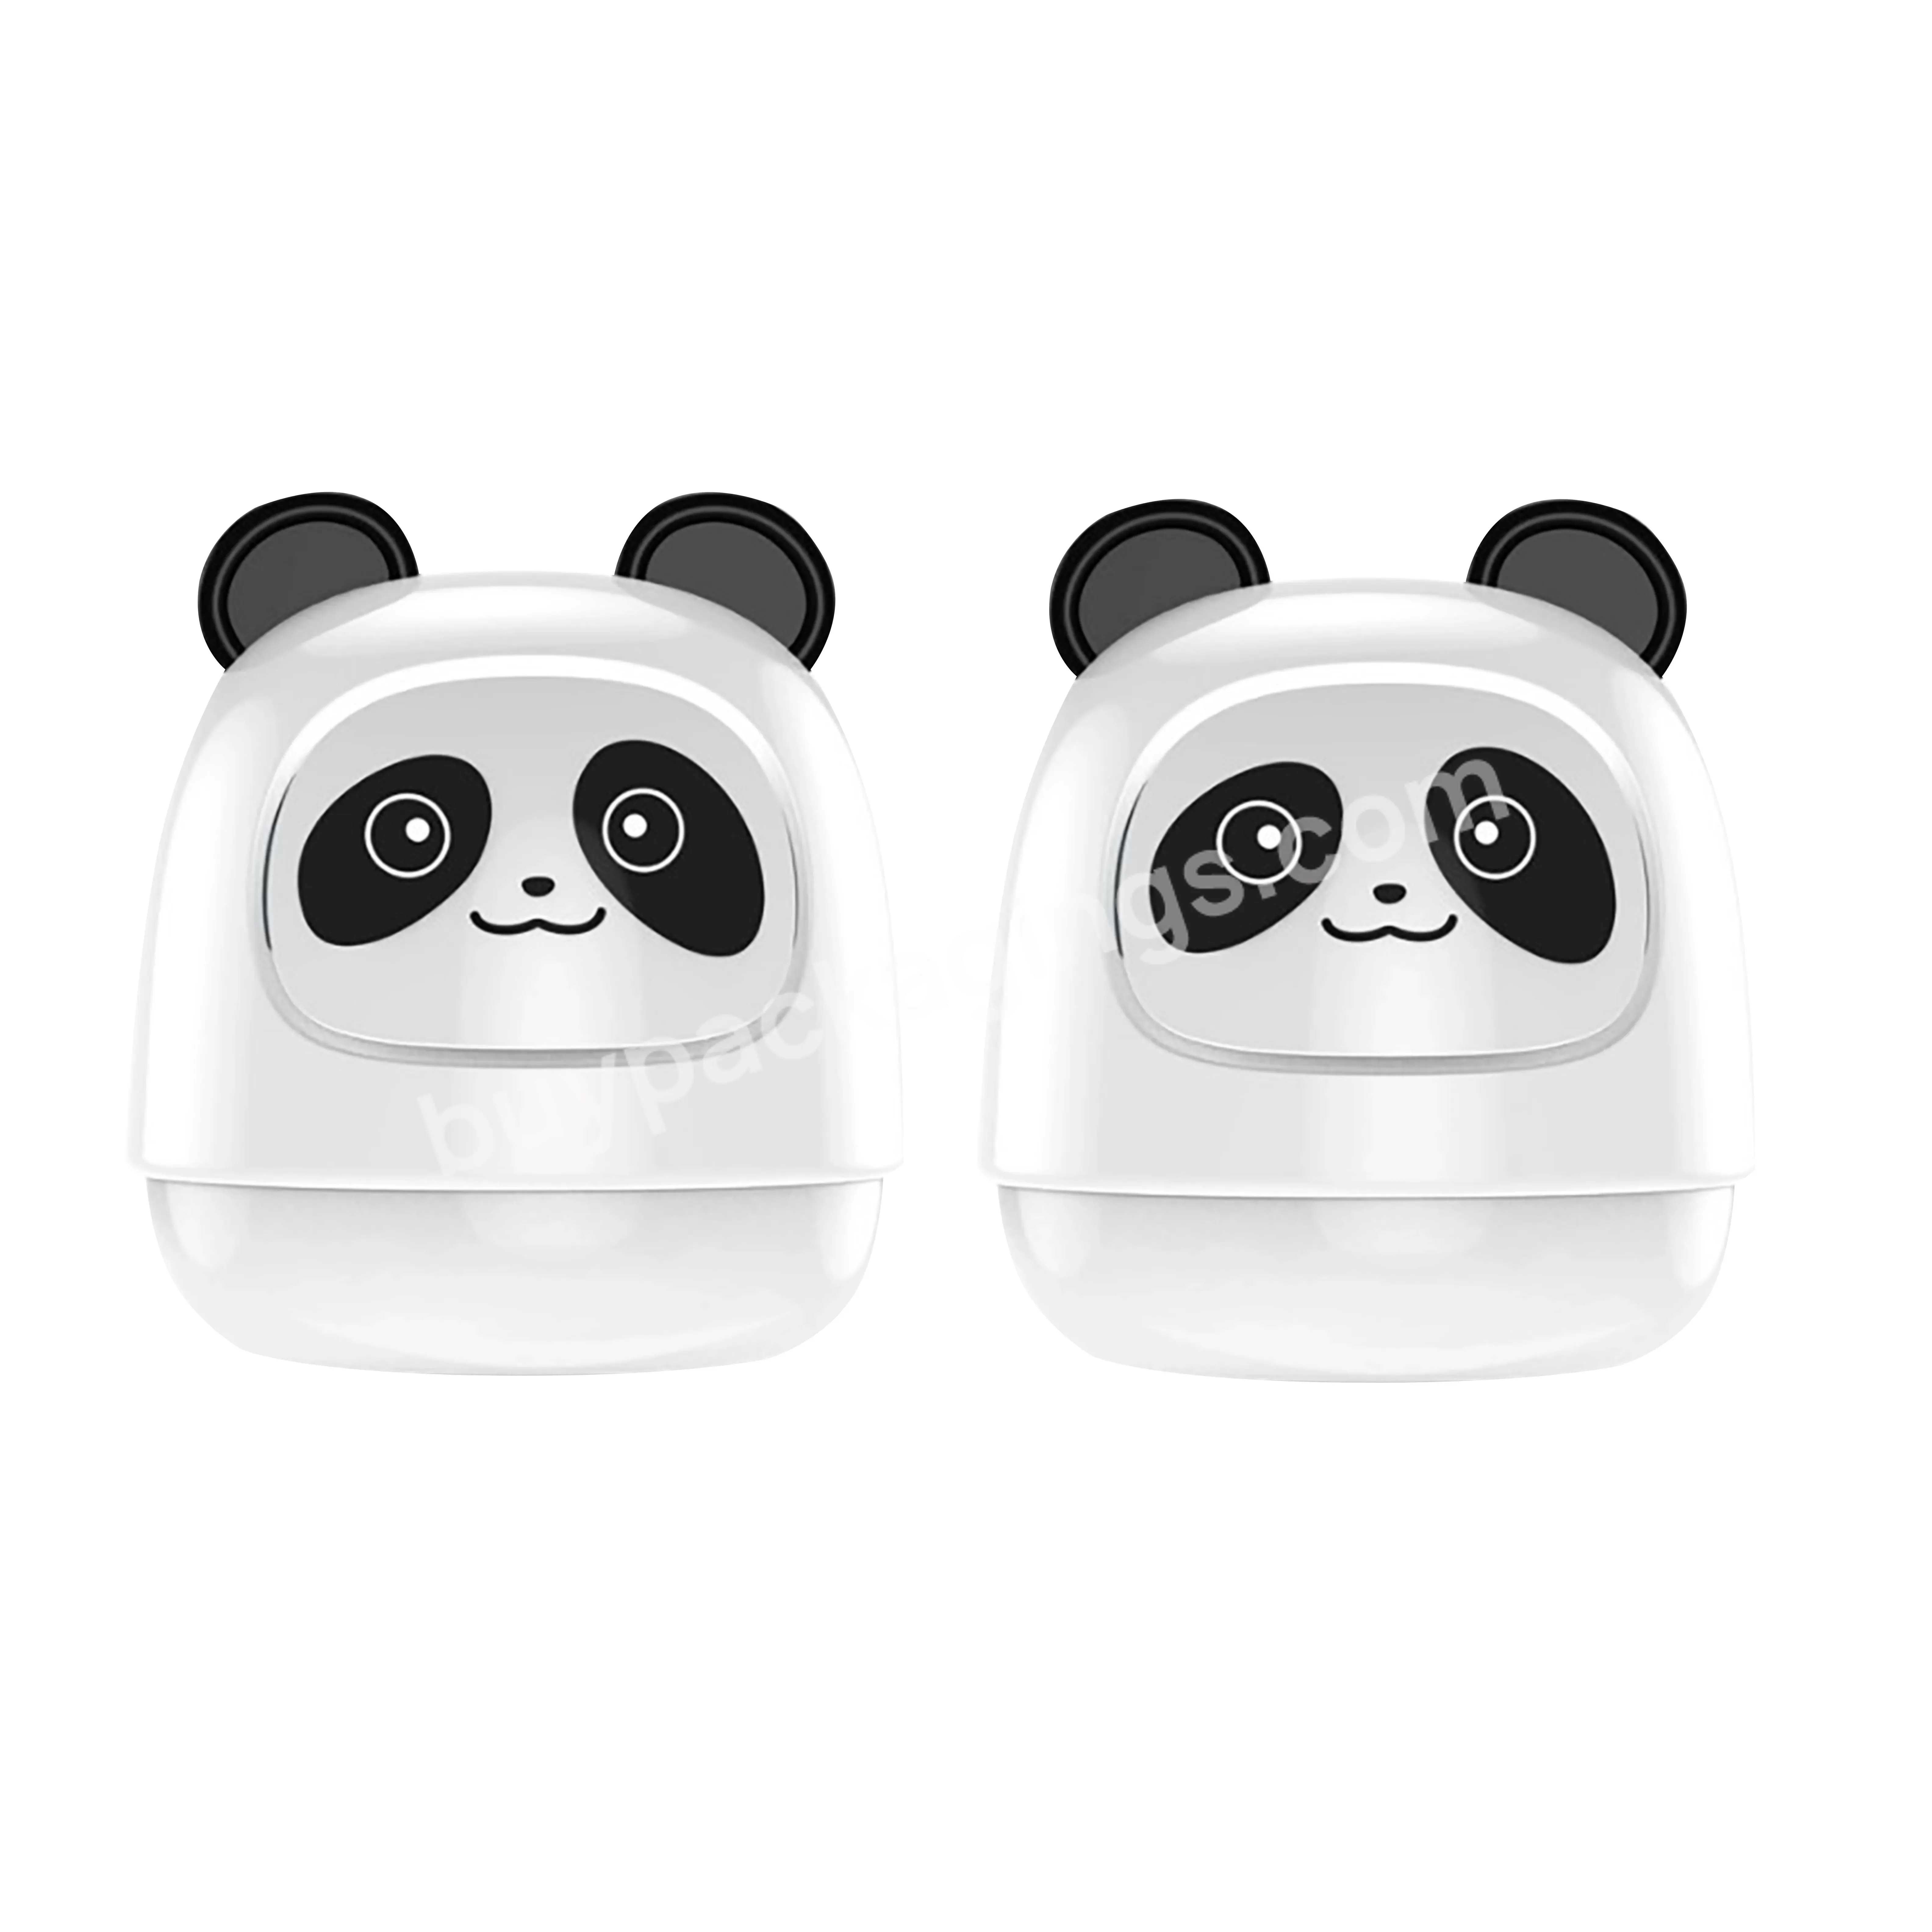 New Solid Lip Balm Lasting Light Fragrance Panda Cartoon Doll Perfume Ornaments Car Aromatherapy Container For Car Decoration - Buy New Solid Lip Balm Lasting Light Fragrance Container,Panda Cartoon Doll Perfume Ornaments Car Aromatherapy Container,C